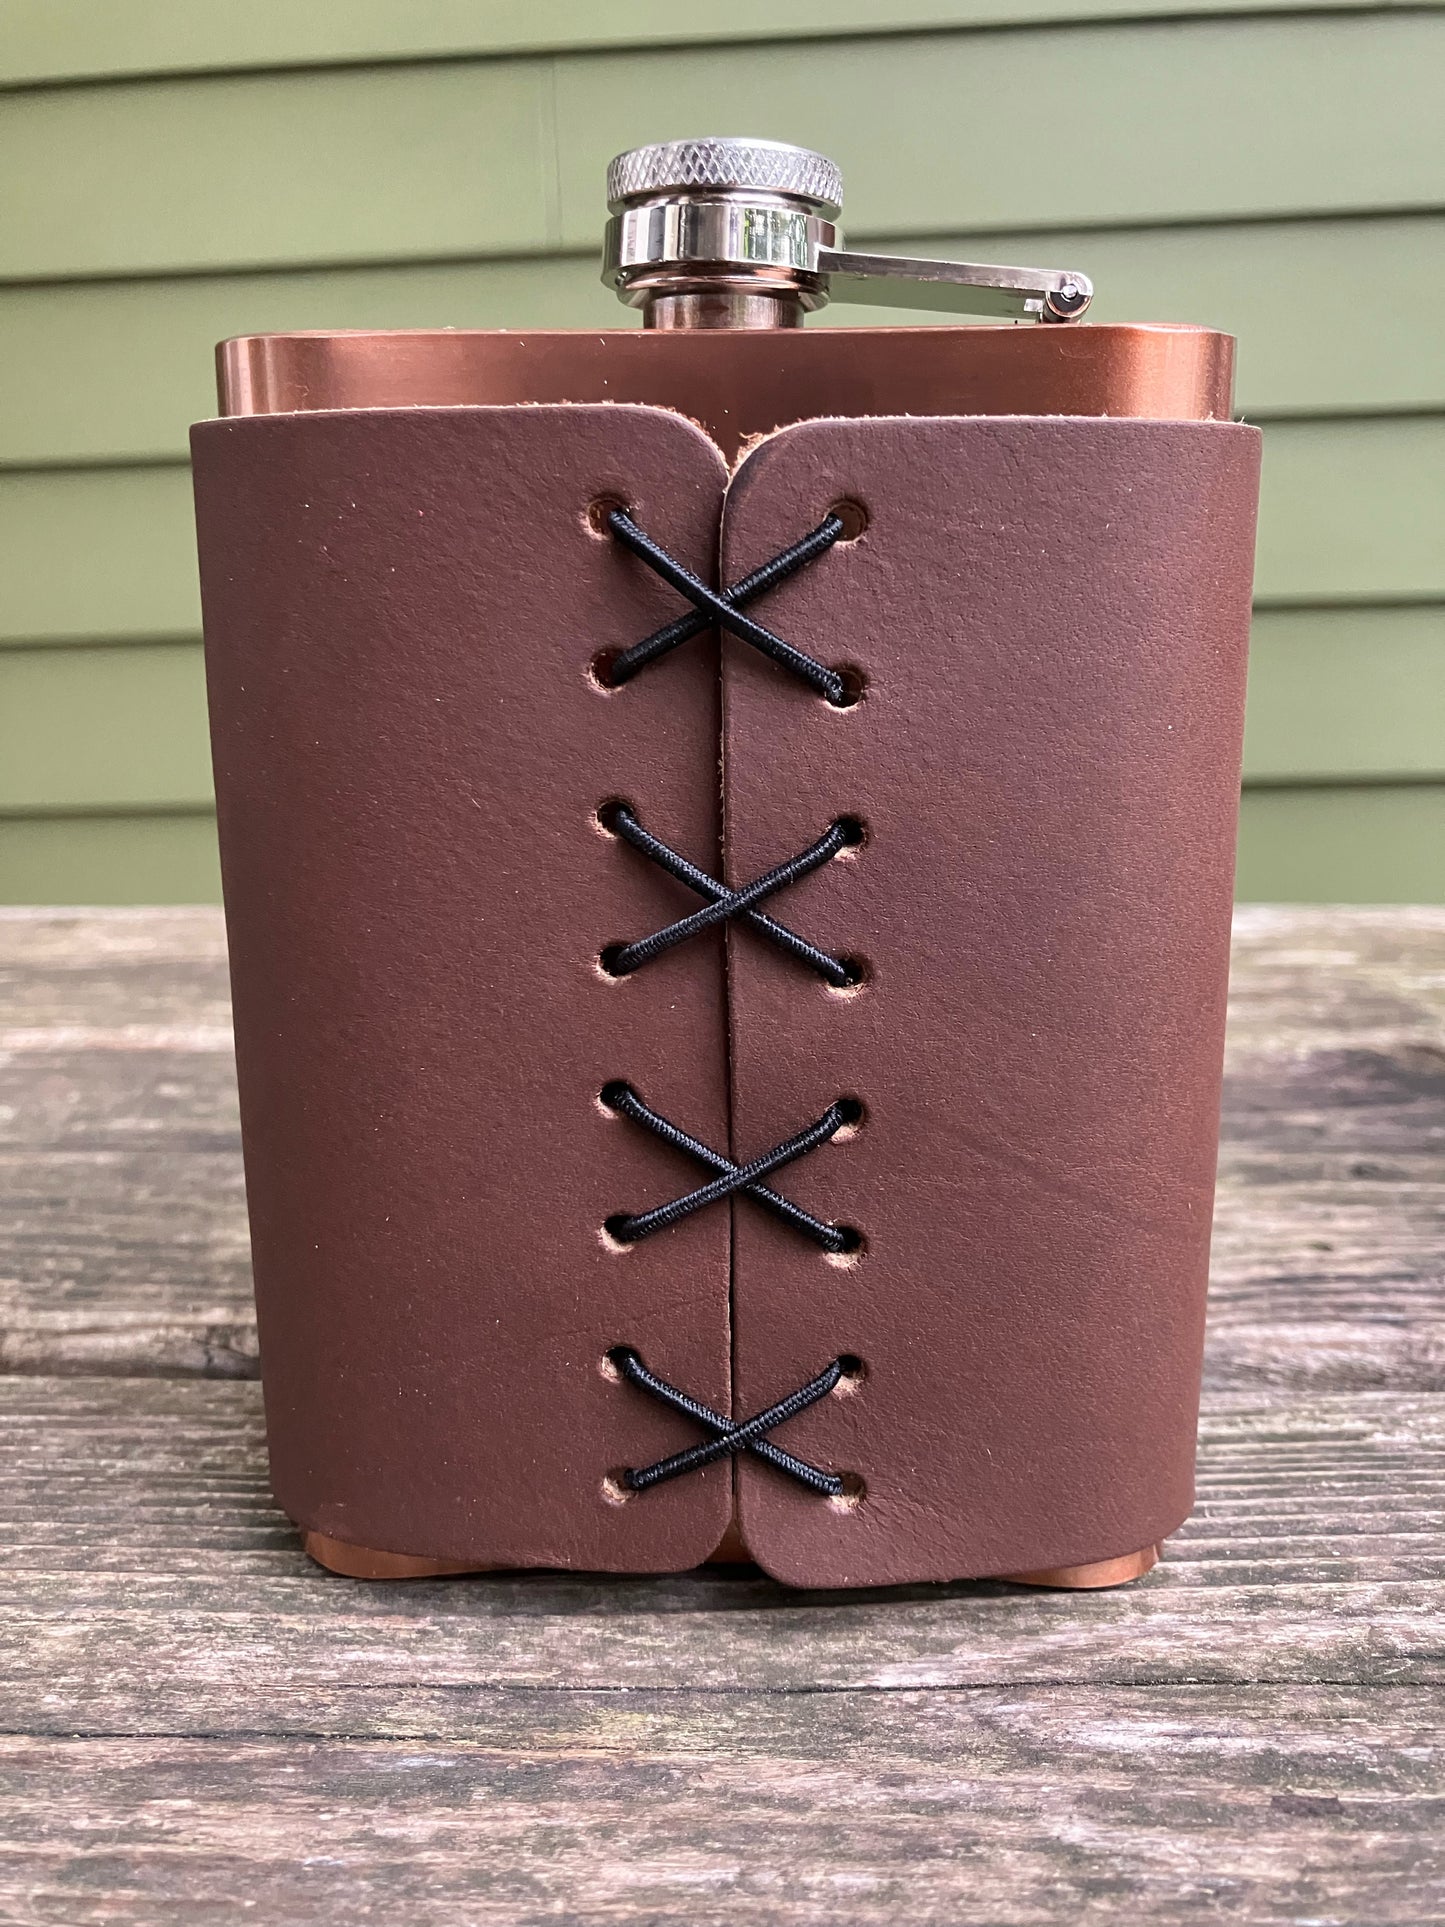 Leather Flask - Mr.